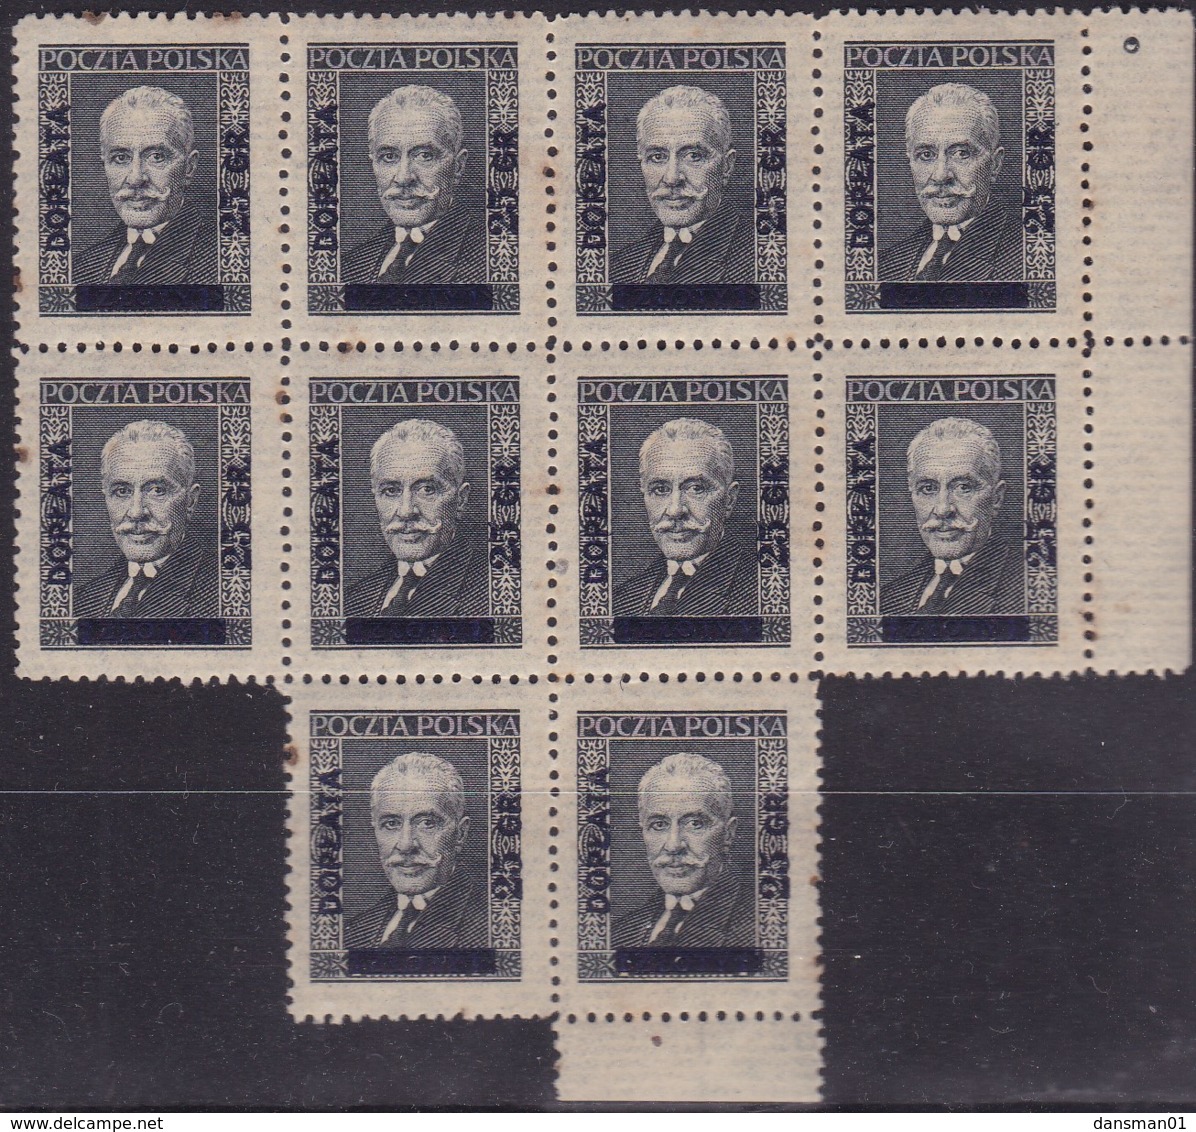 POLAND 1934 Postage Due Fi D91 Mint Hinged Block Of 10 - Taxe